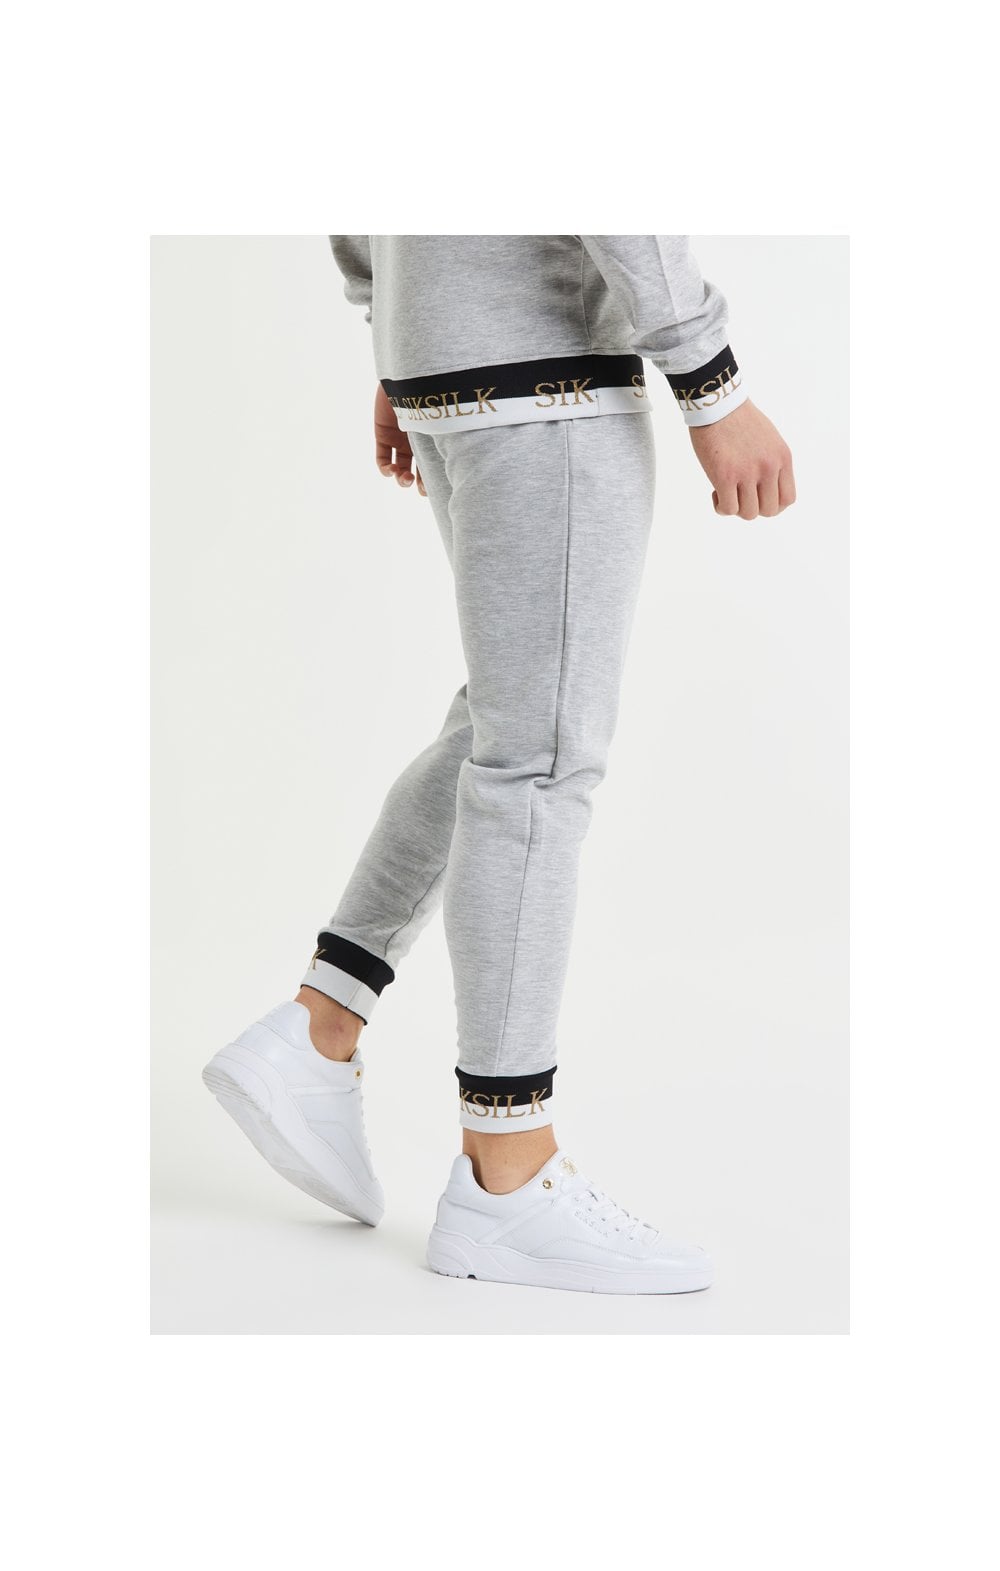 SikSilk Deluxe Fitted Jogger - Grey Marl (1)